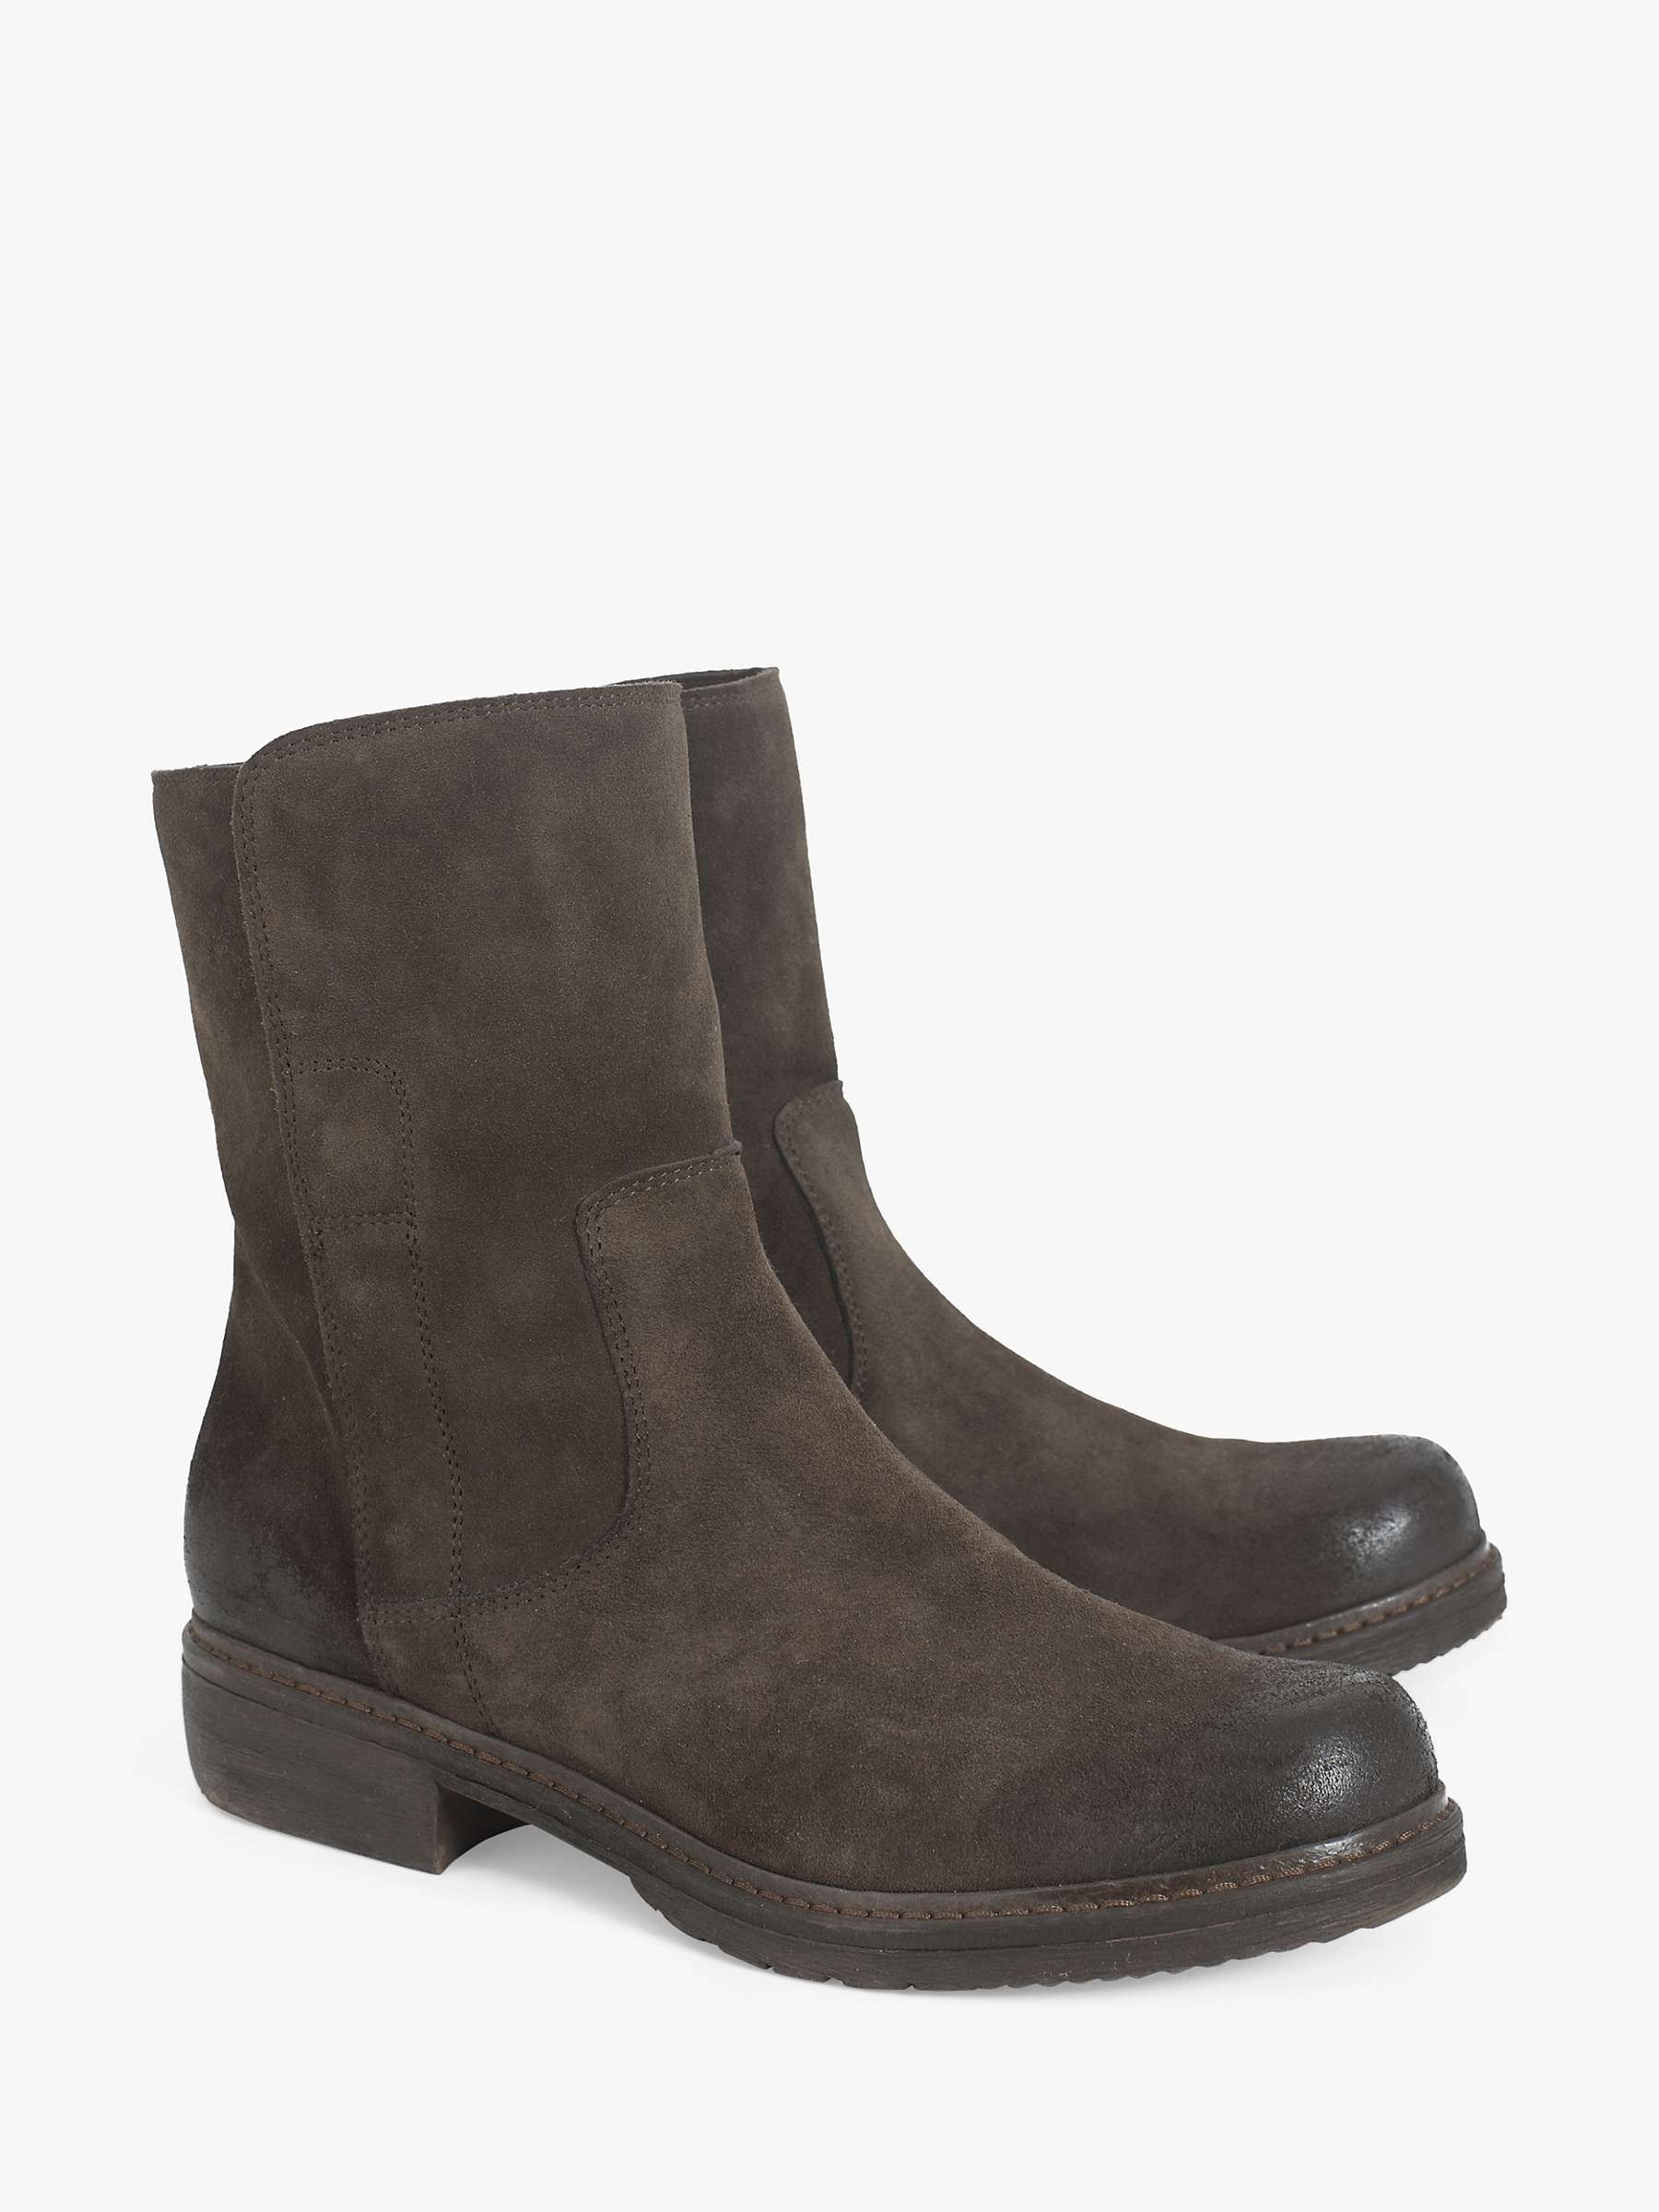 Buy Celtic & Co. Essential Leather Ankle Boots Online at johnlewis.com